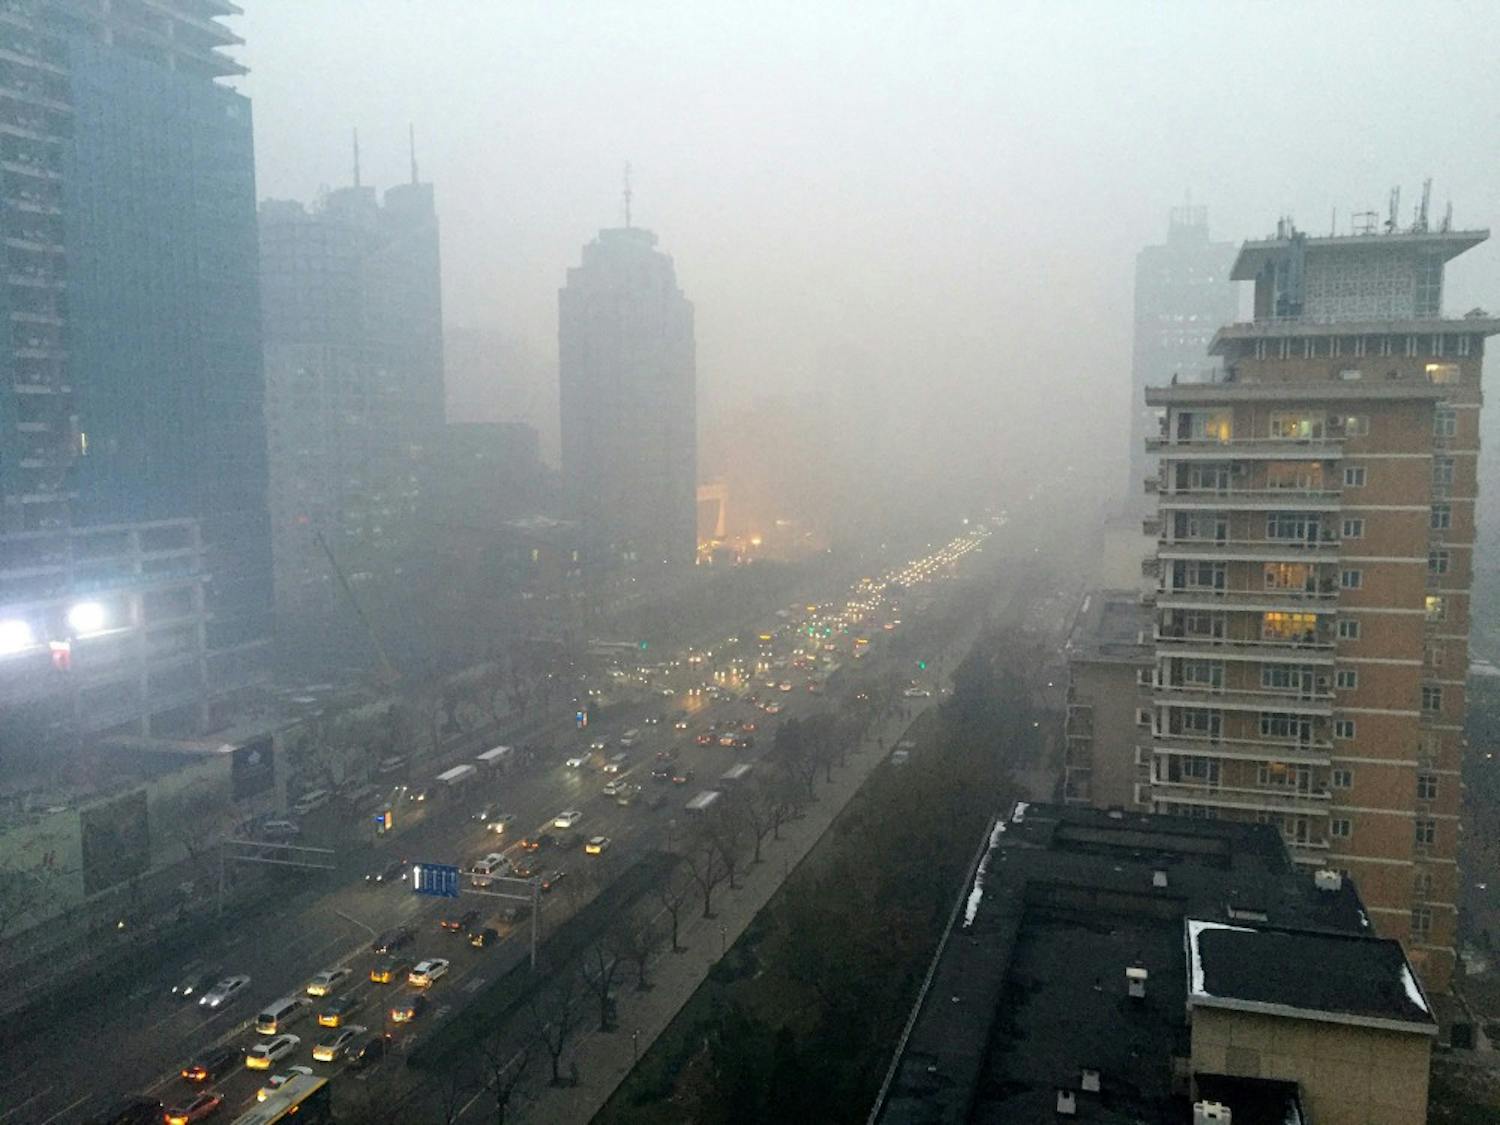 Smog hangs over Beijing's main boulevard, Chang'an Avenue, looking west toward the Forbidden City, on Monday, Nov. 30, 2015. Although the city is cracking down on dirty vehicles and some power plants, the smog of the last week has demonstrated Beijing's pollution-control efforts have yet to produce lasting results. It comes as Chinese President Xi Jinping is in Paris pledging that China will reduce emissions linked to global climate change.  (Stuart Leavenworth/McClatchy/TNS) 